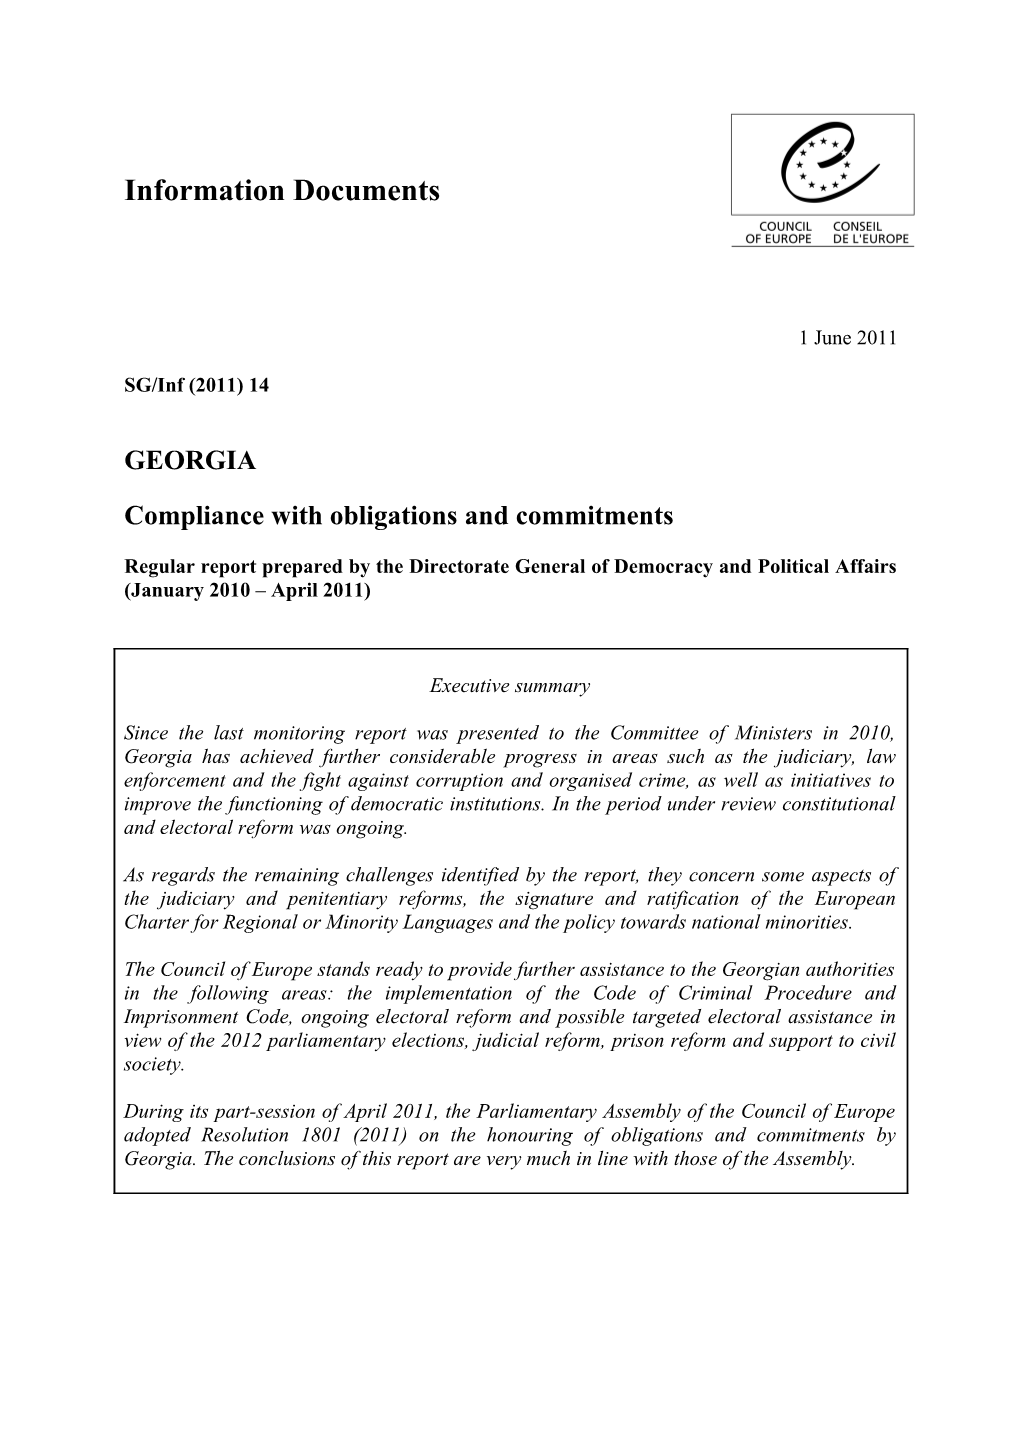 Compliance with Obligations and Commitments